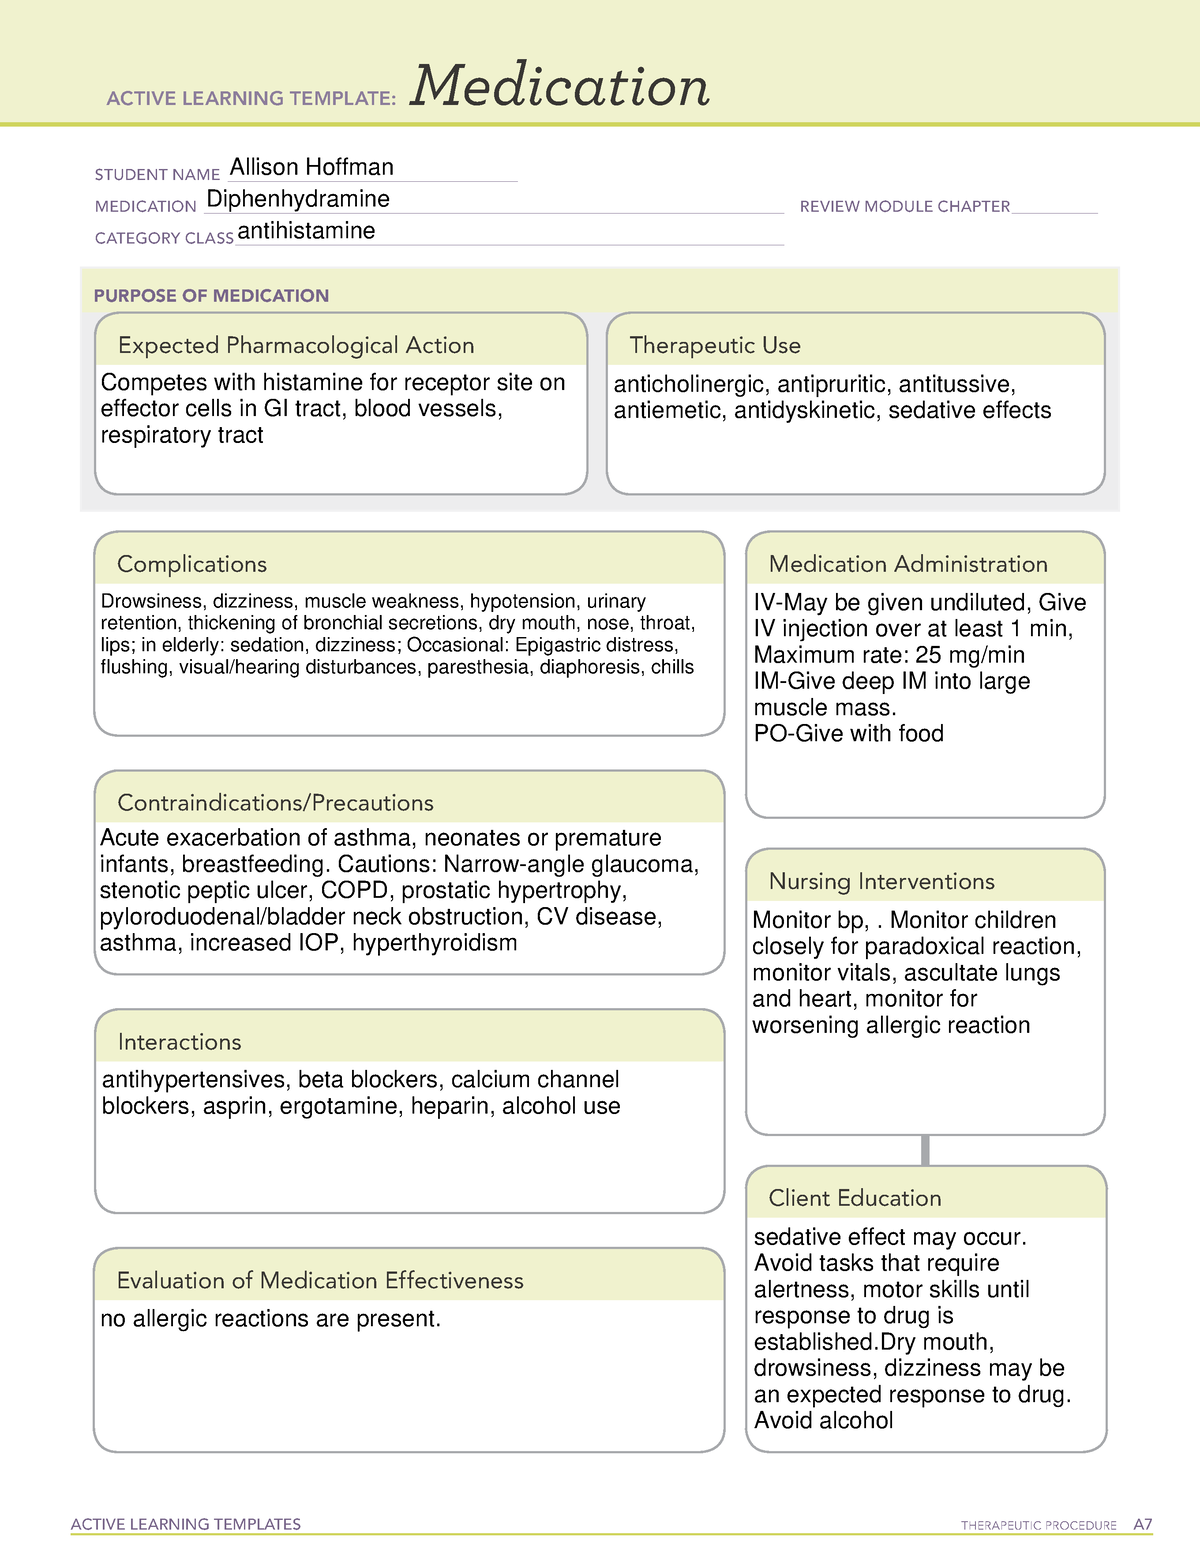 Diphenhydramine med card ACTIVE LEARNING TEMPLATES THERAPEUTIC